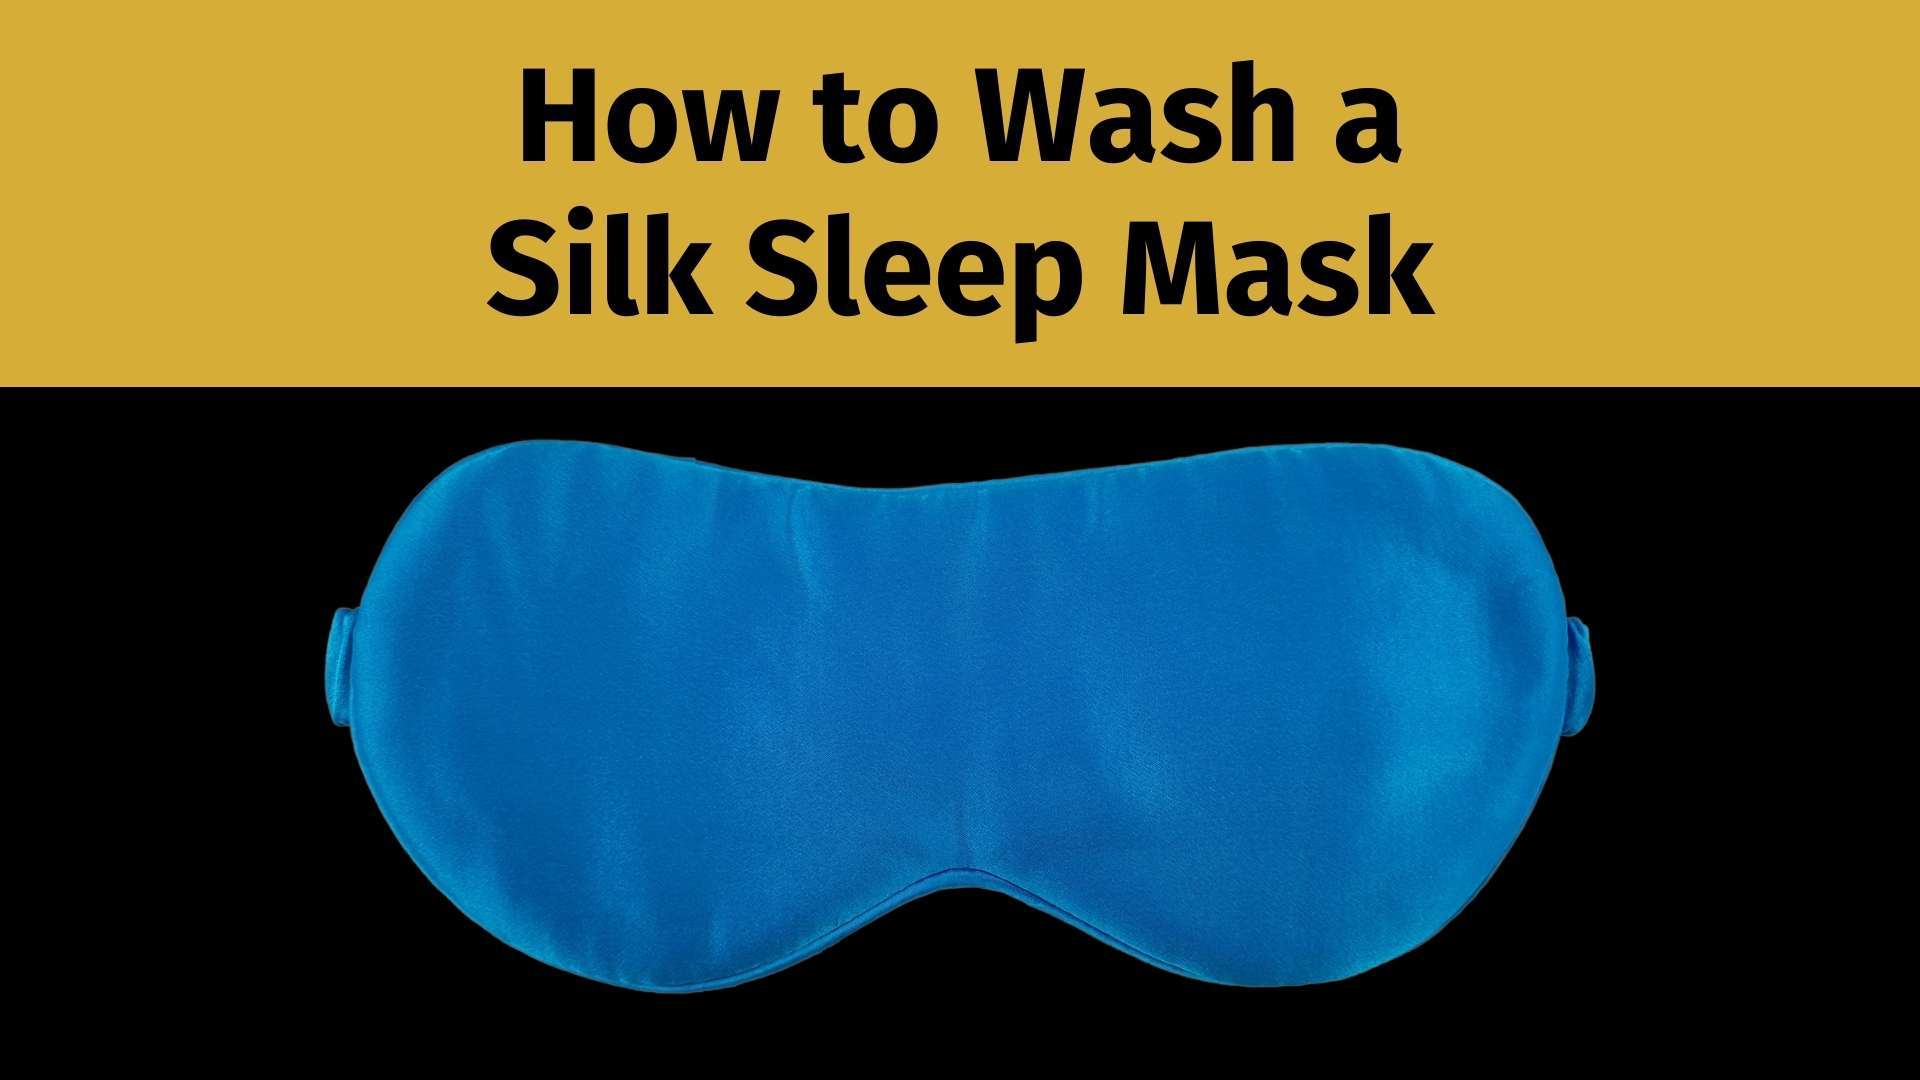 how to wash a silk sleep mask banner image